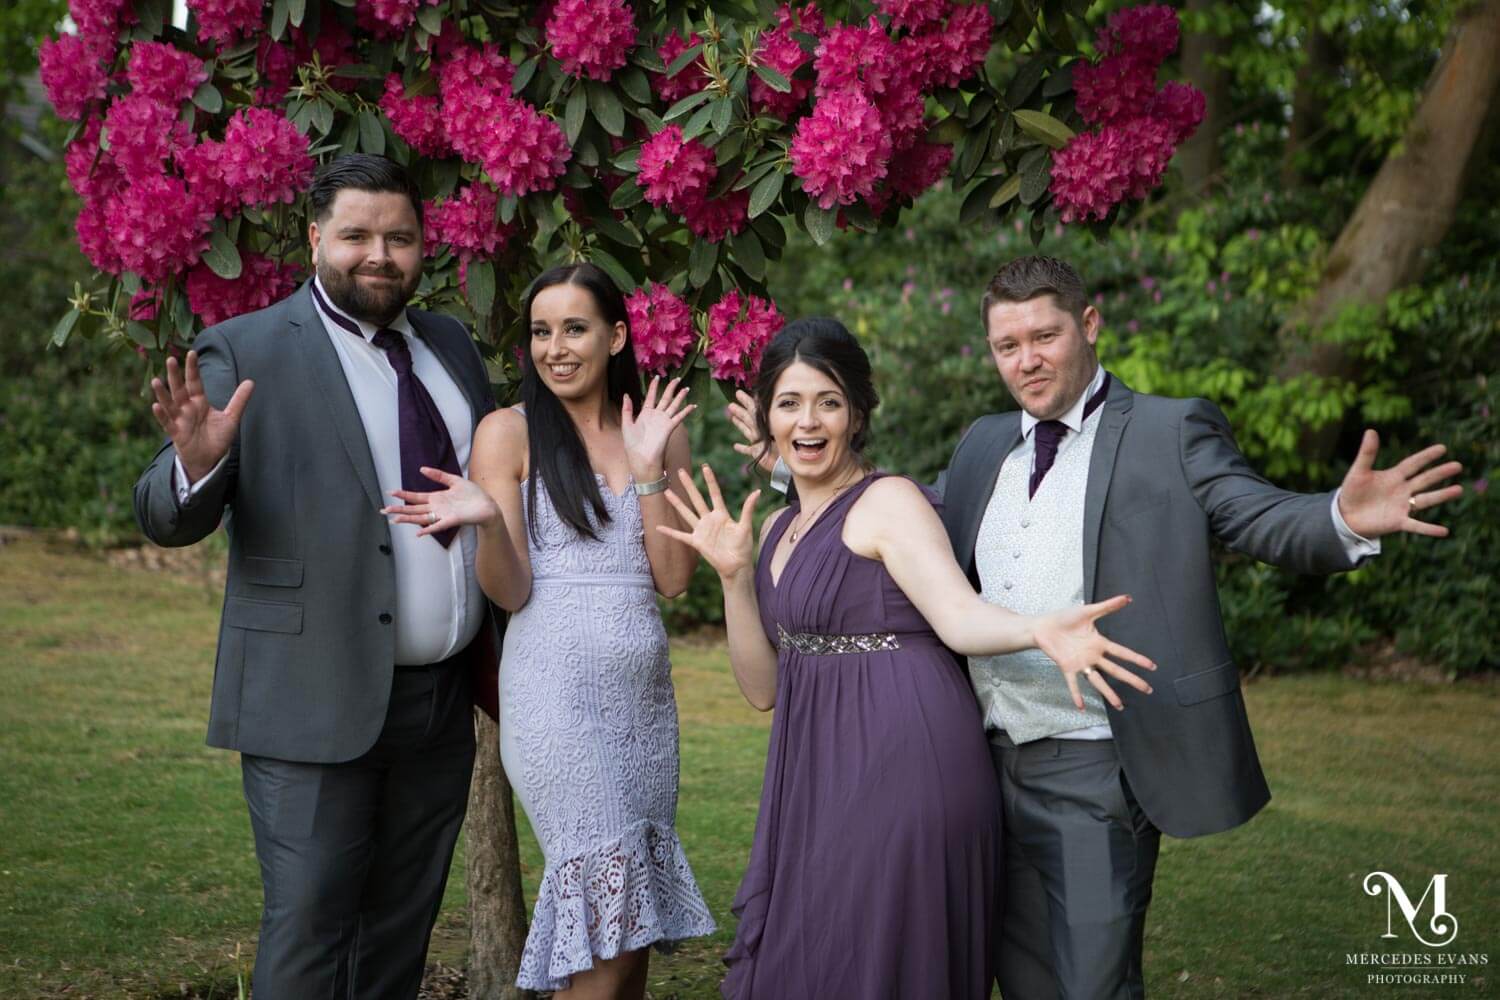 Wedding guests pose with jazz hands in front of the pink rhododendrons at Frimley Hall Hotel